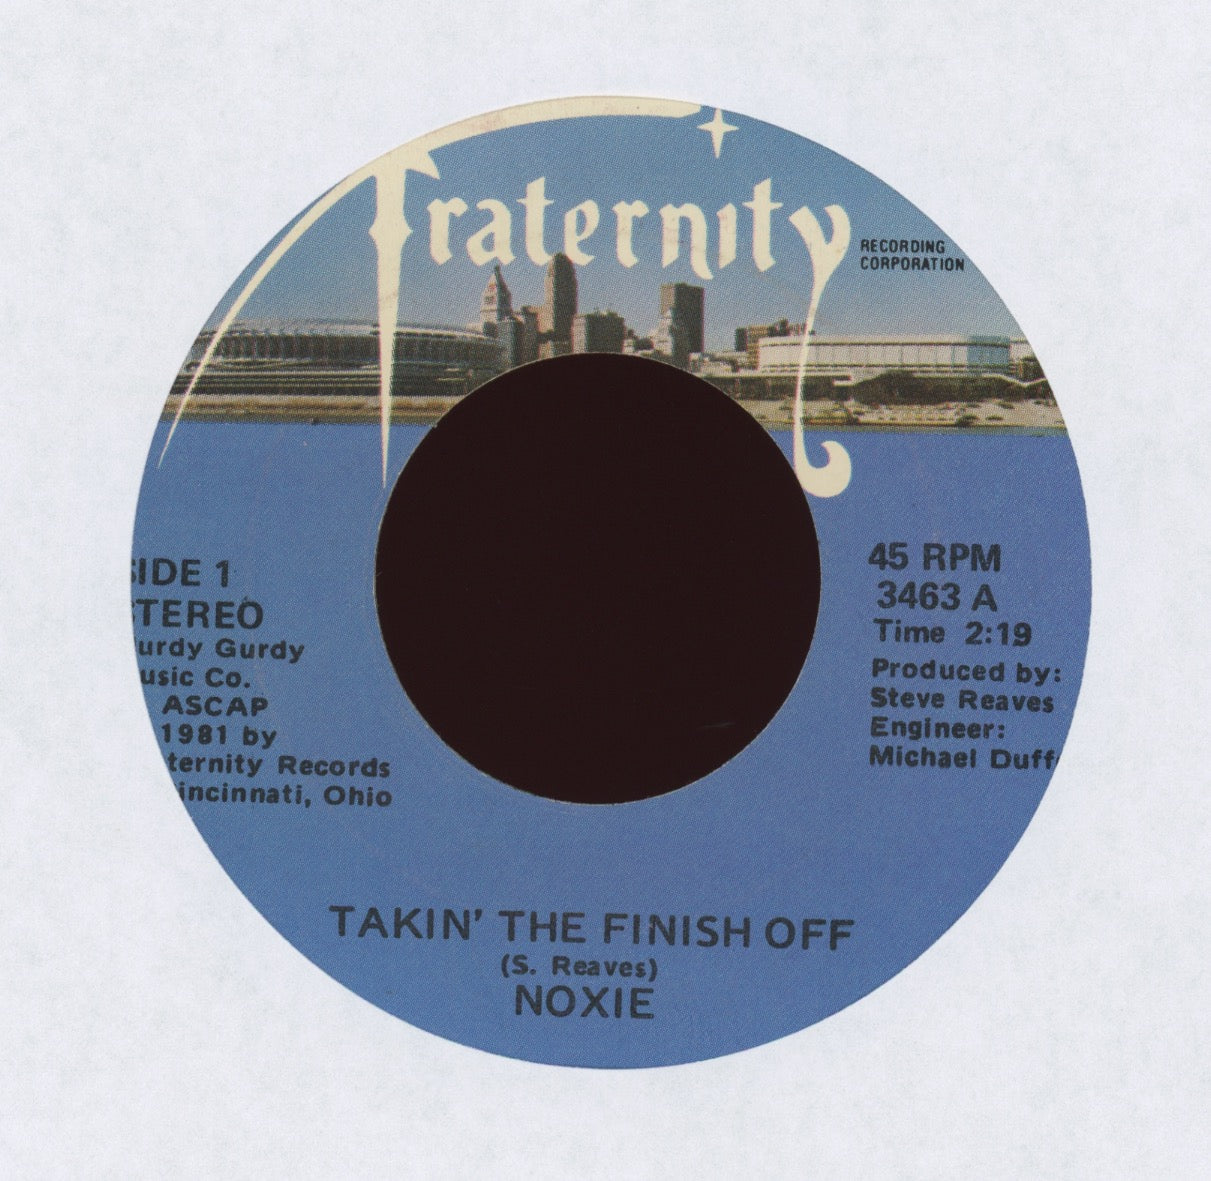 Noxie - Takin' The Finish Off on Fraternity